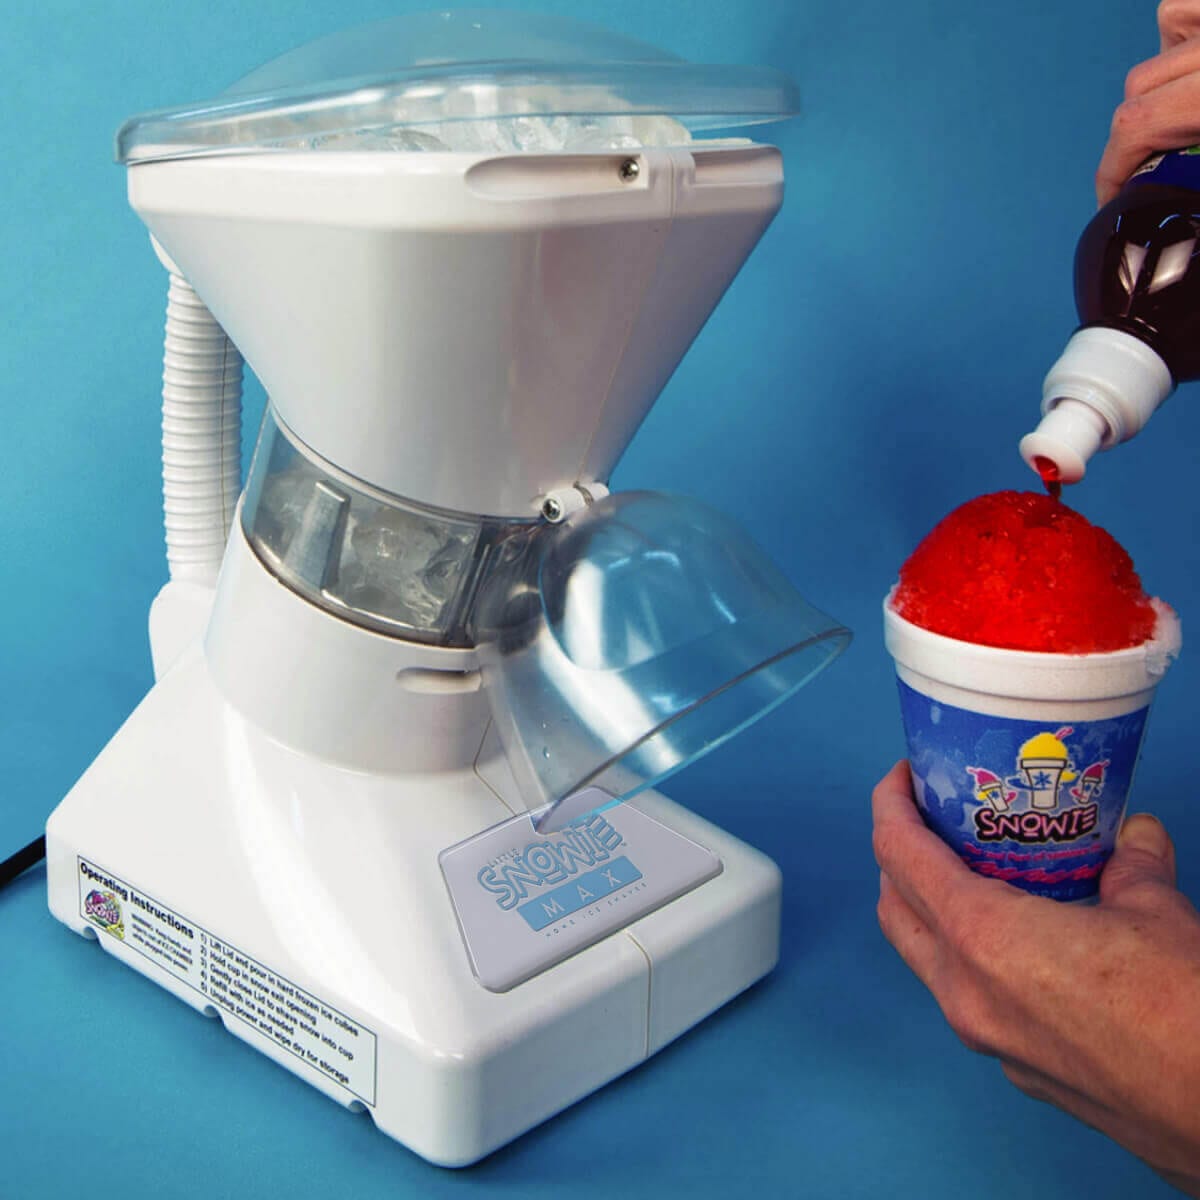 Shaved ice machine for home